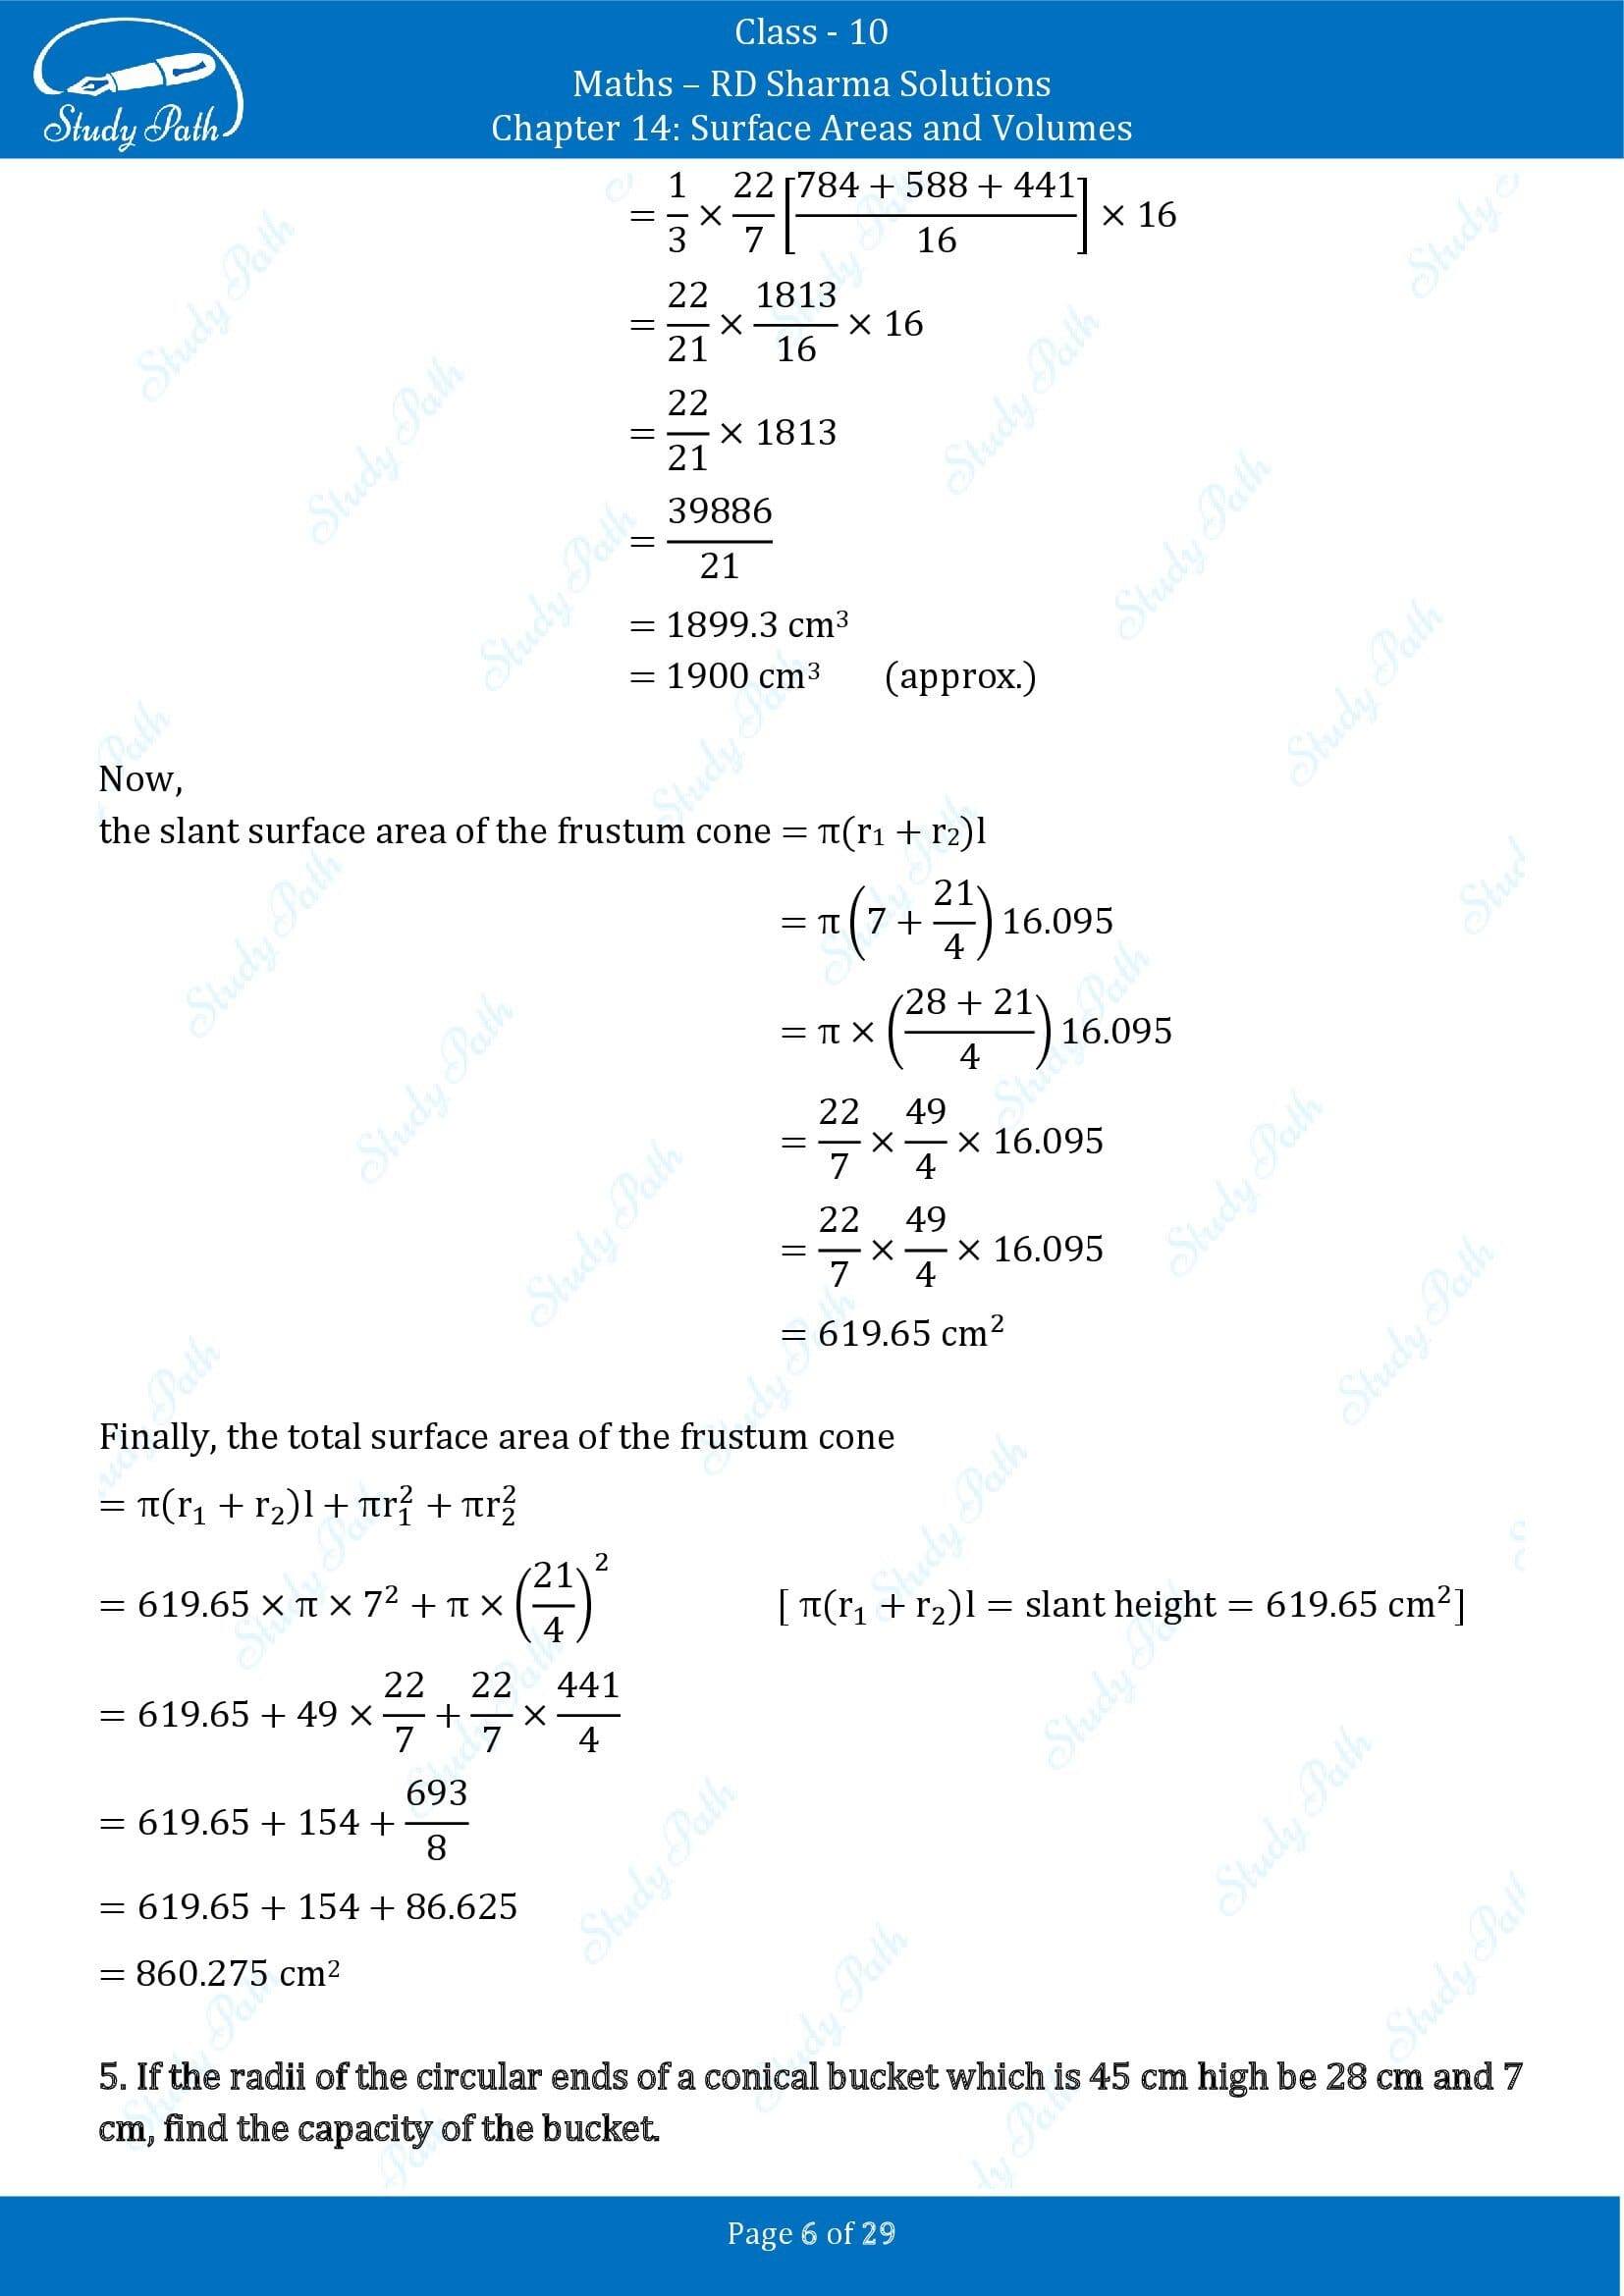 RD Sharma Solutions Class 10 Chapter 14 Surface Areas and Volumes Exercise 14.3 00006